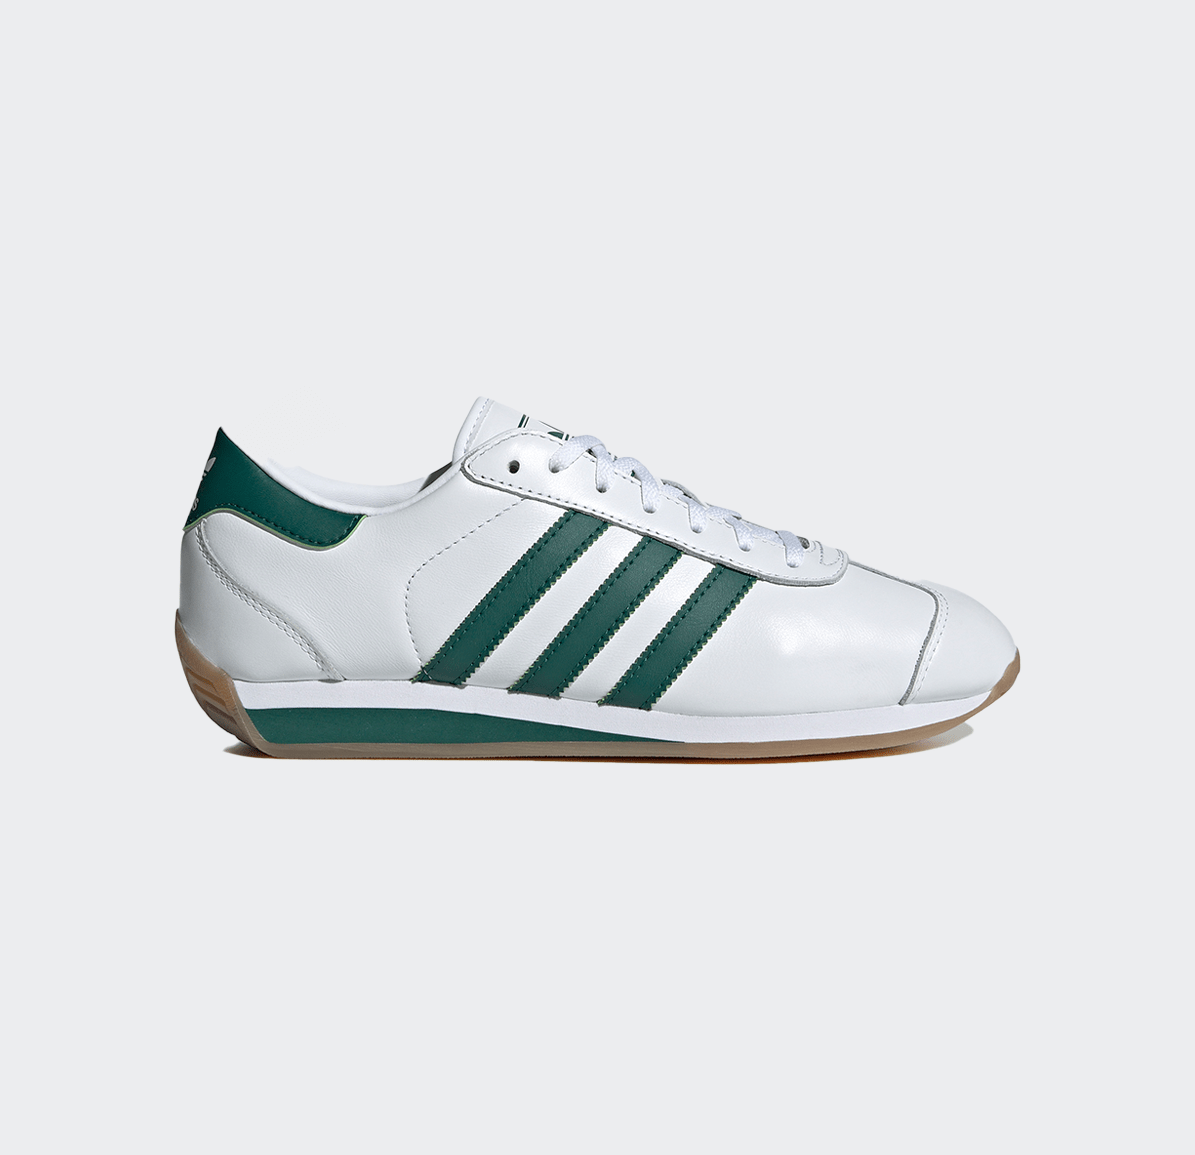 Adidas Country II - Cloud White/Collegiate Green/Cloud White - Adidas - State Of Play